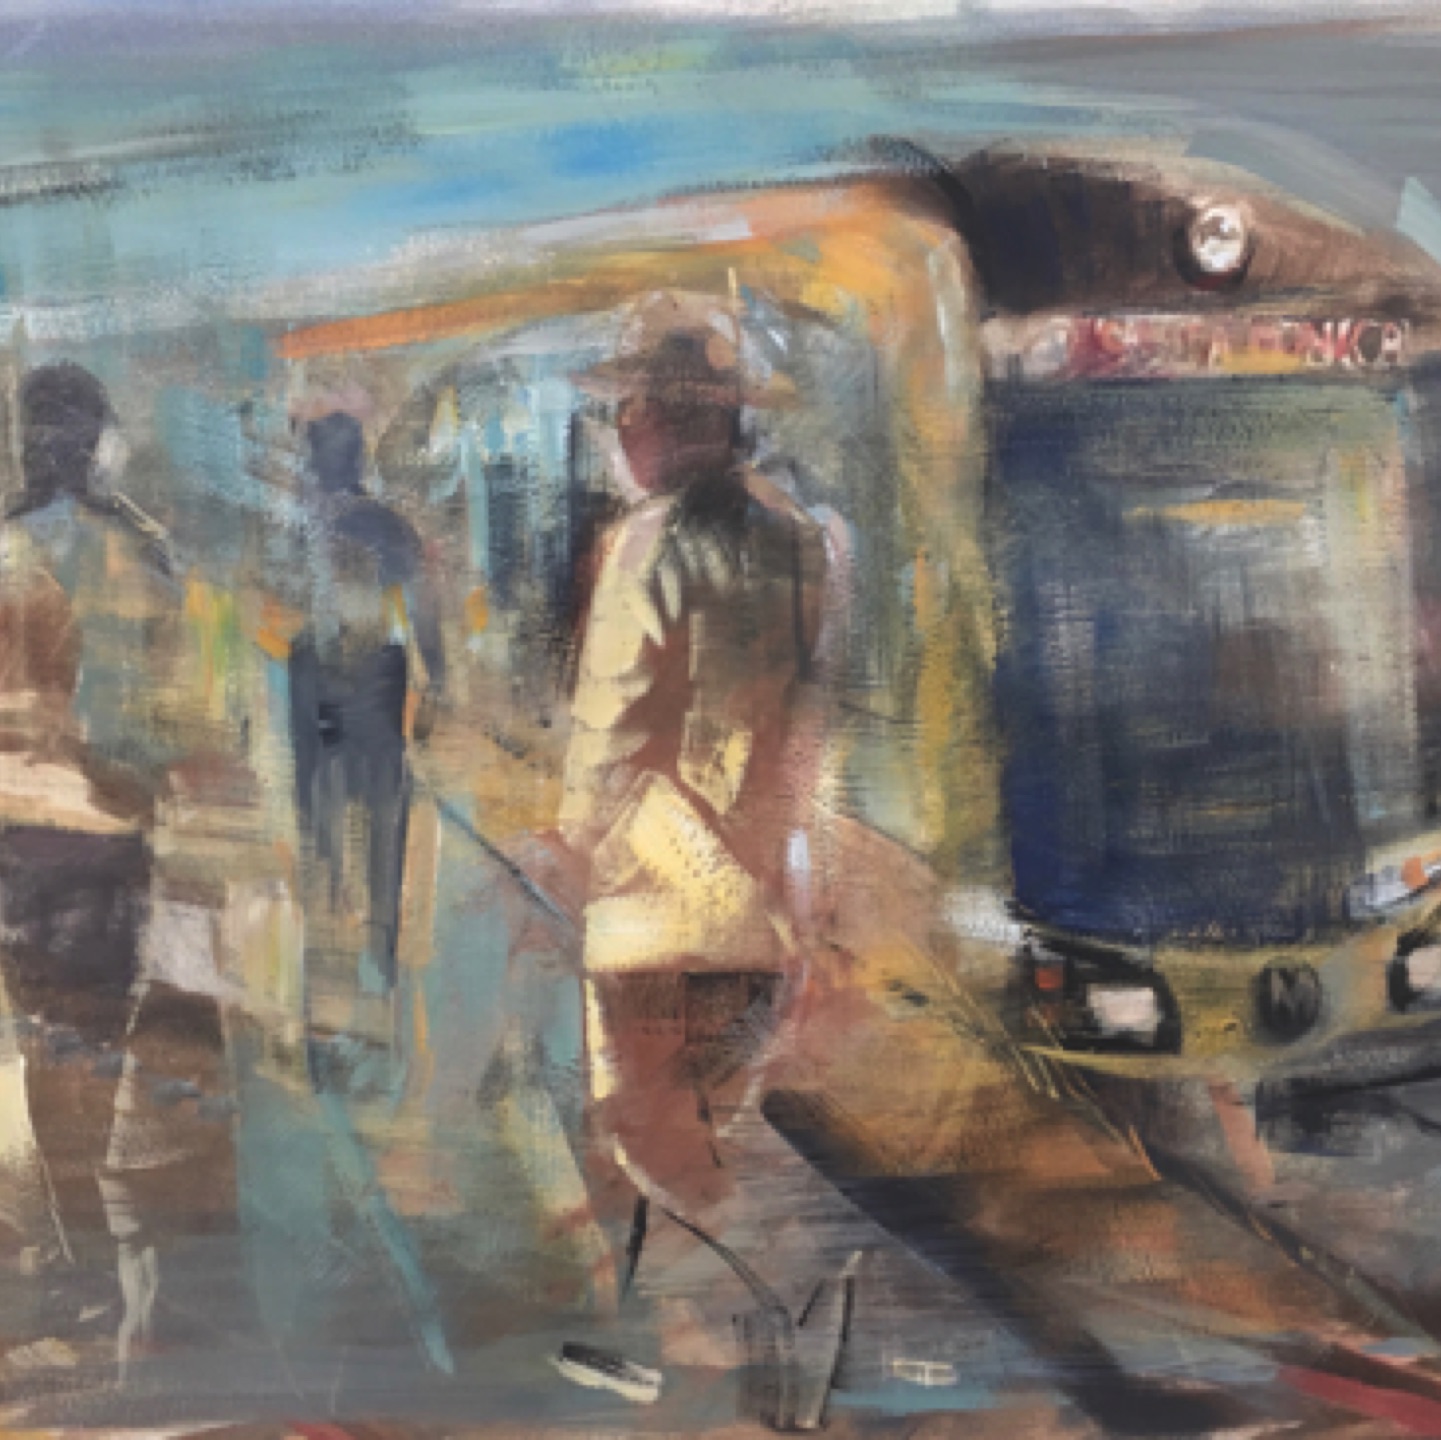 Gregg Chadwick
Bergamot Station (Expo Line)
22"x30"gouache on paper 2019
Private Collection, Los Angeles